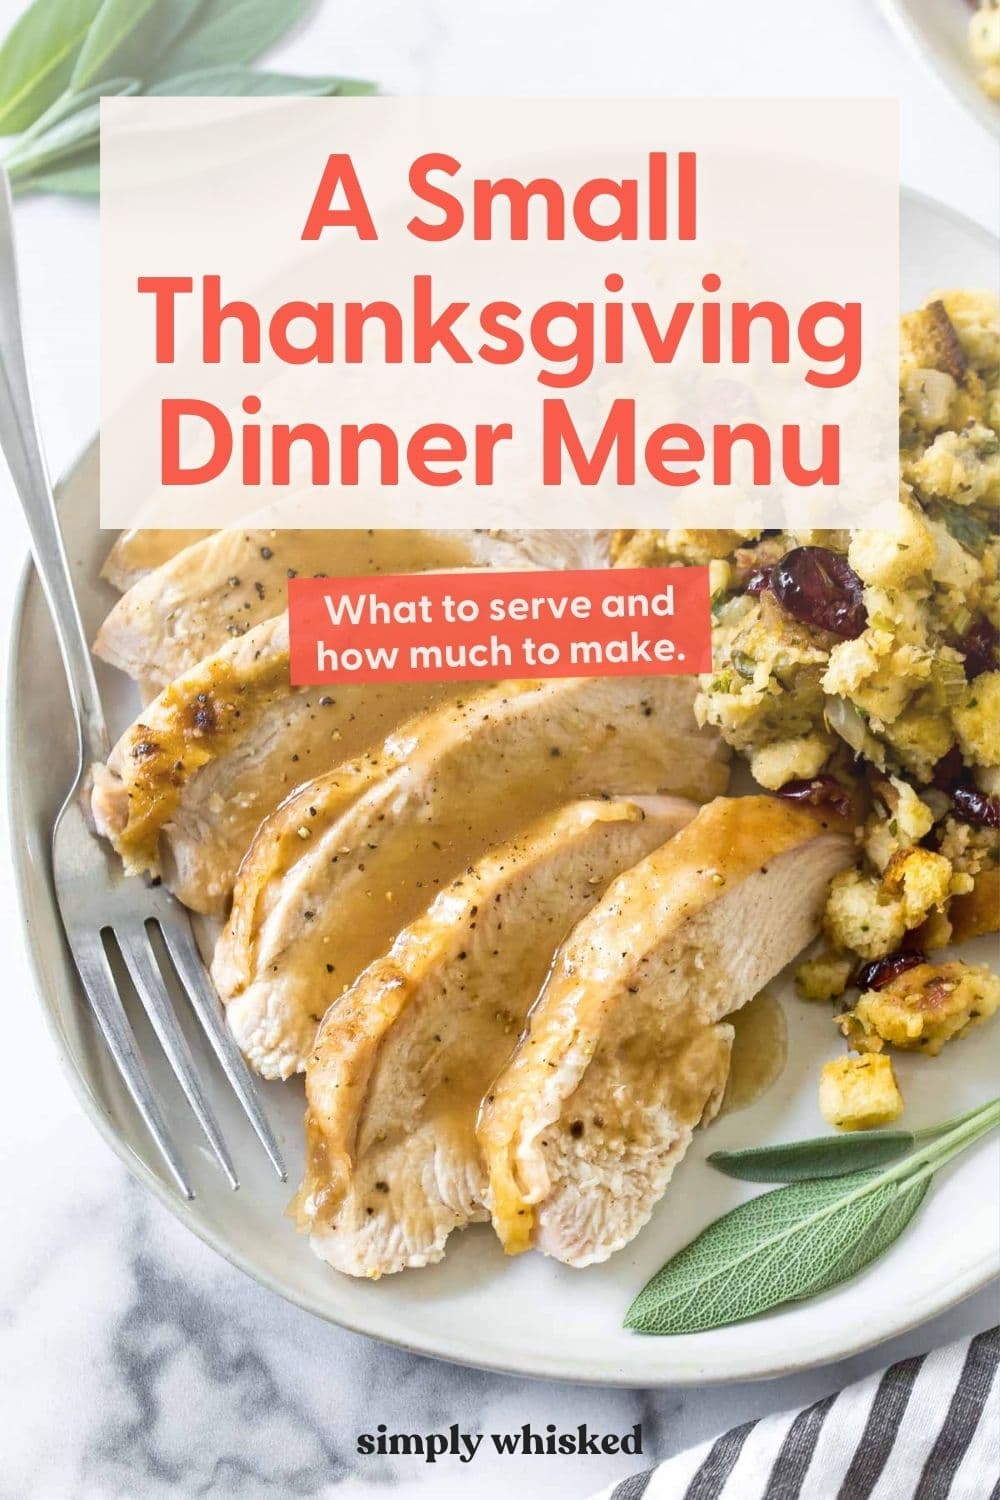 A Small Thanksgiving Menu: for 4 people or less - Simply Whisked